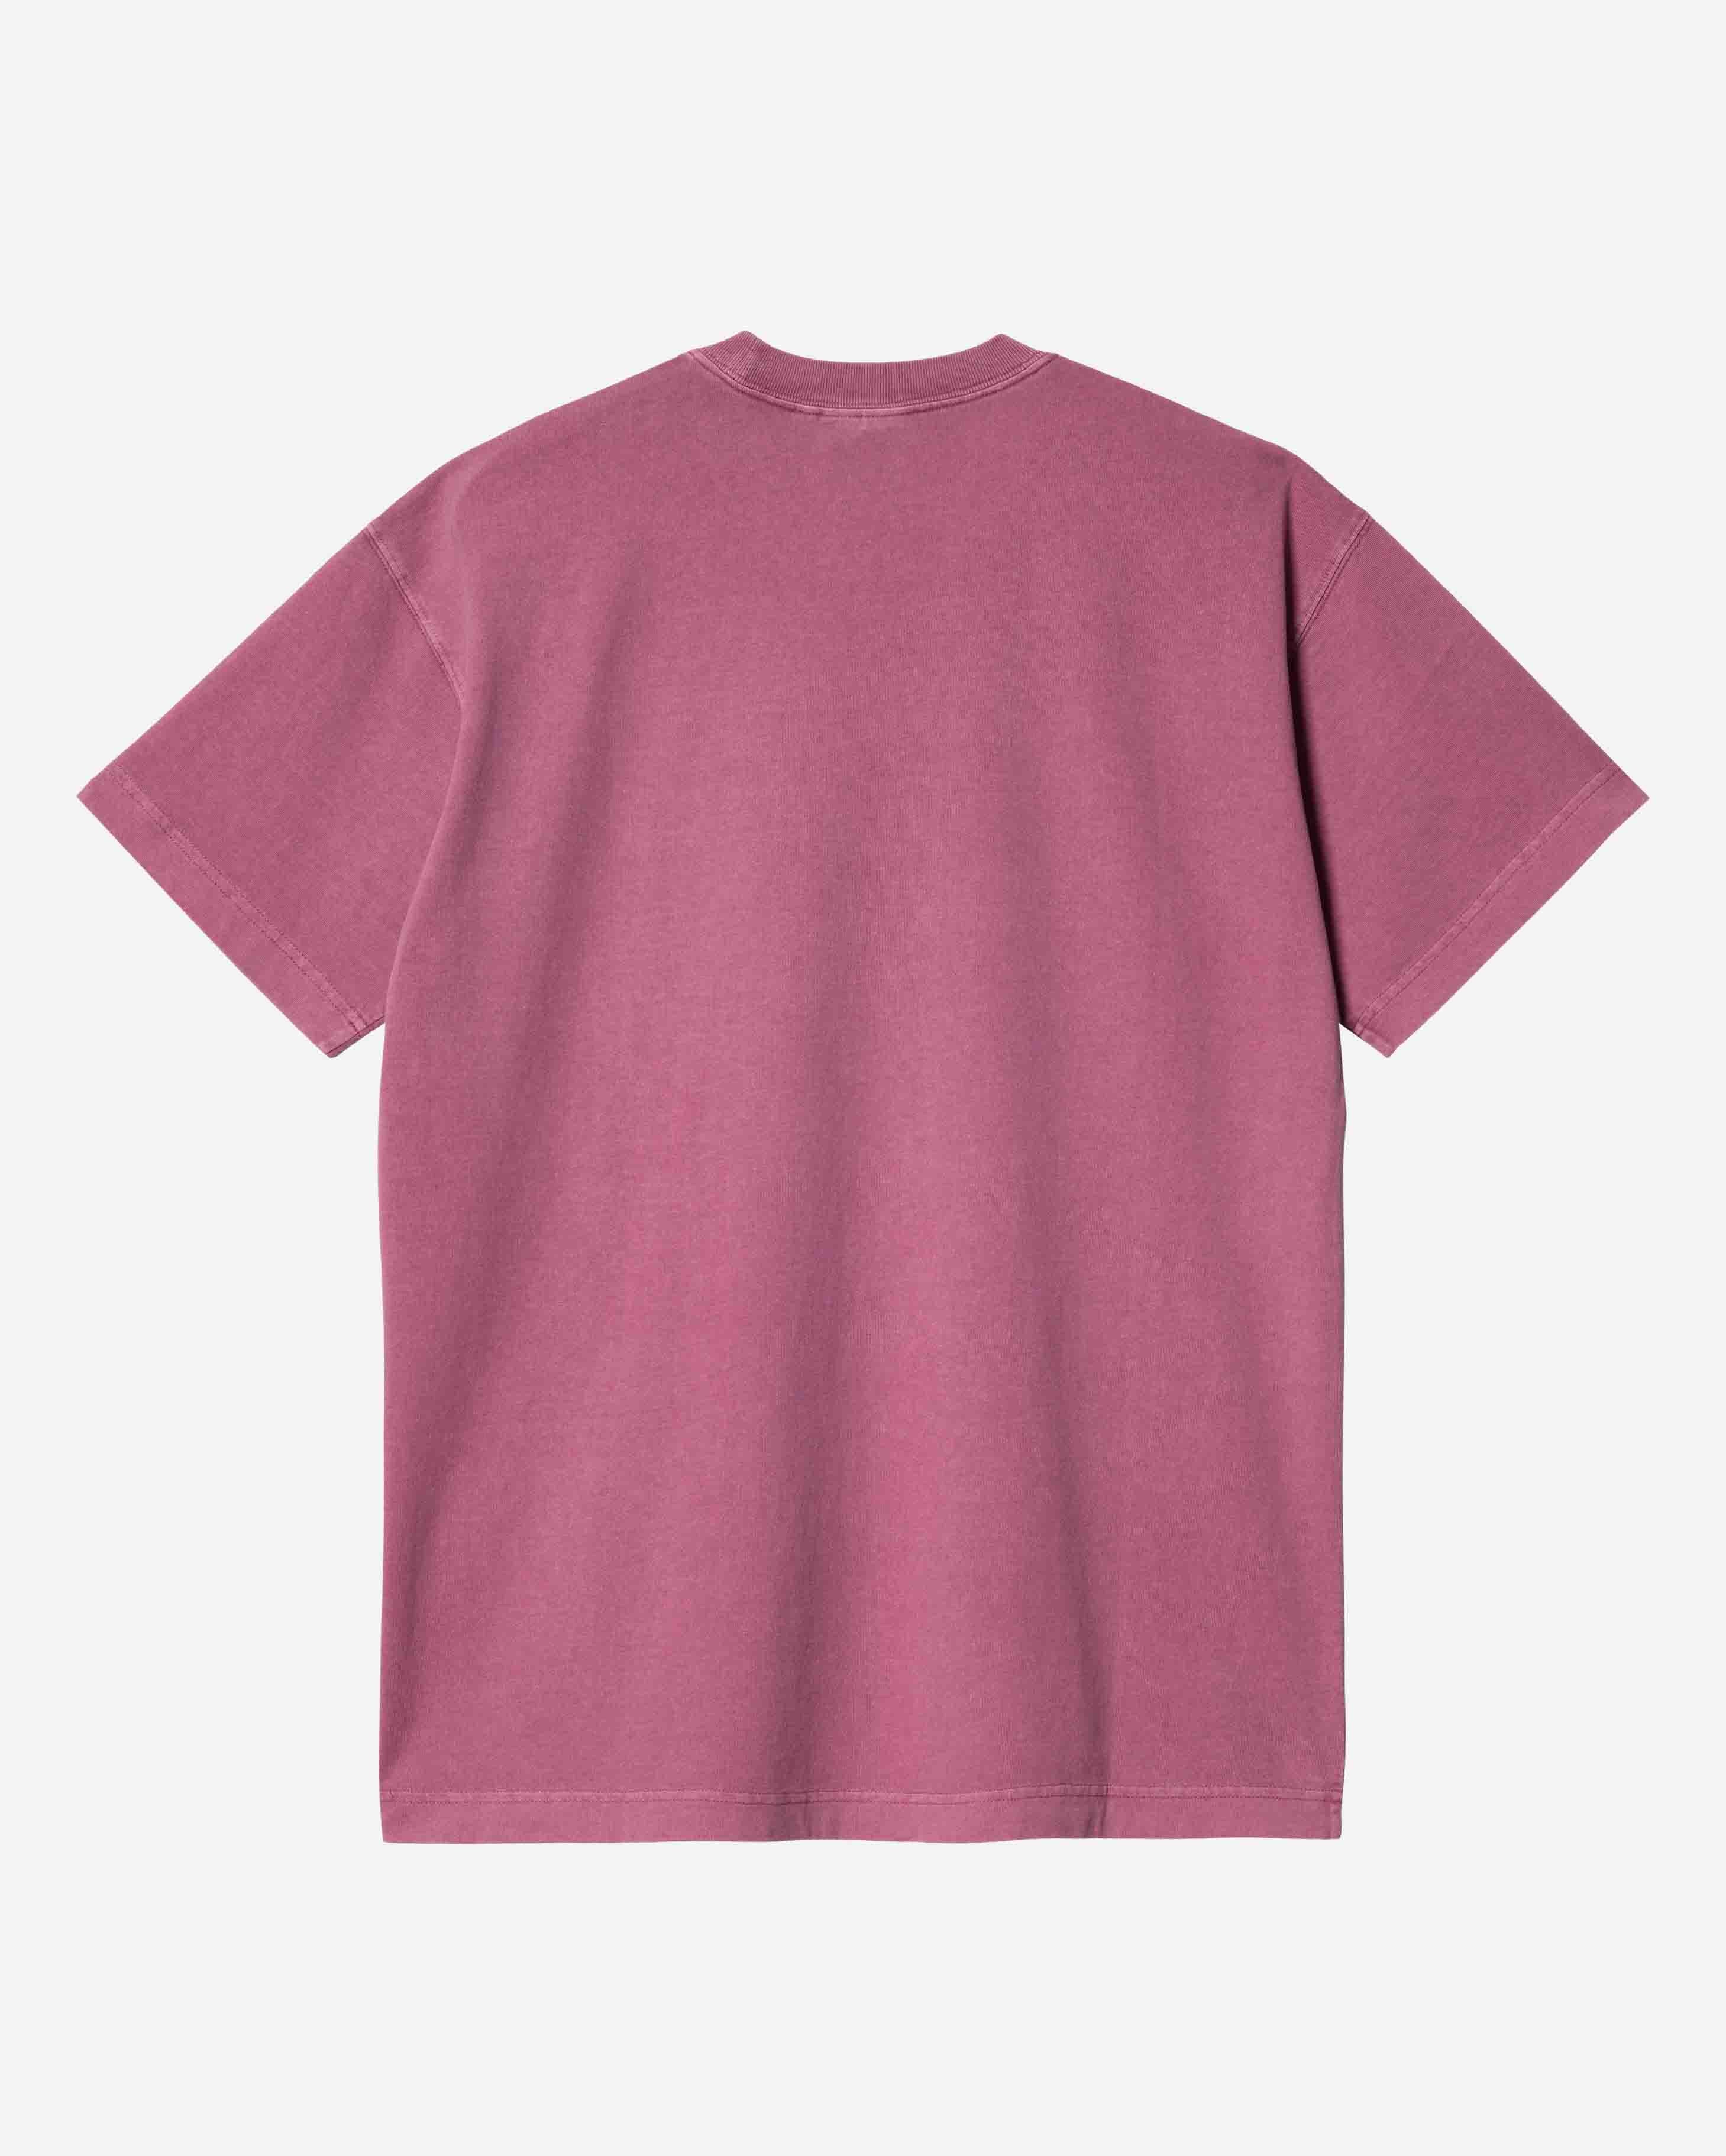 S/S Nelson T-Shirt image